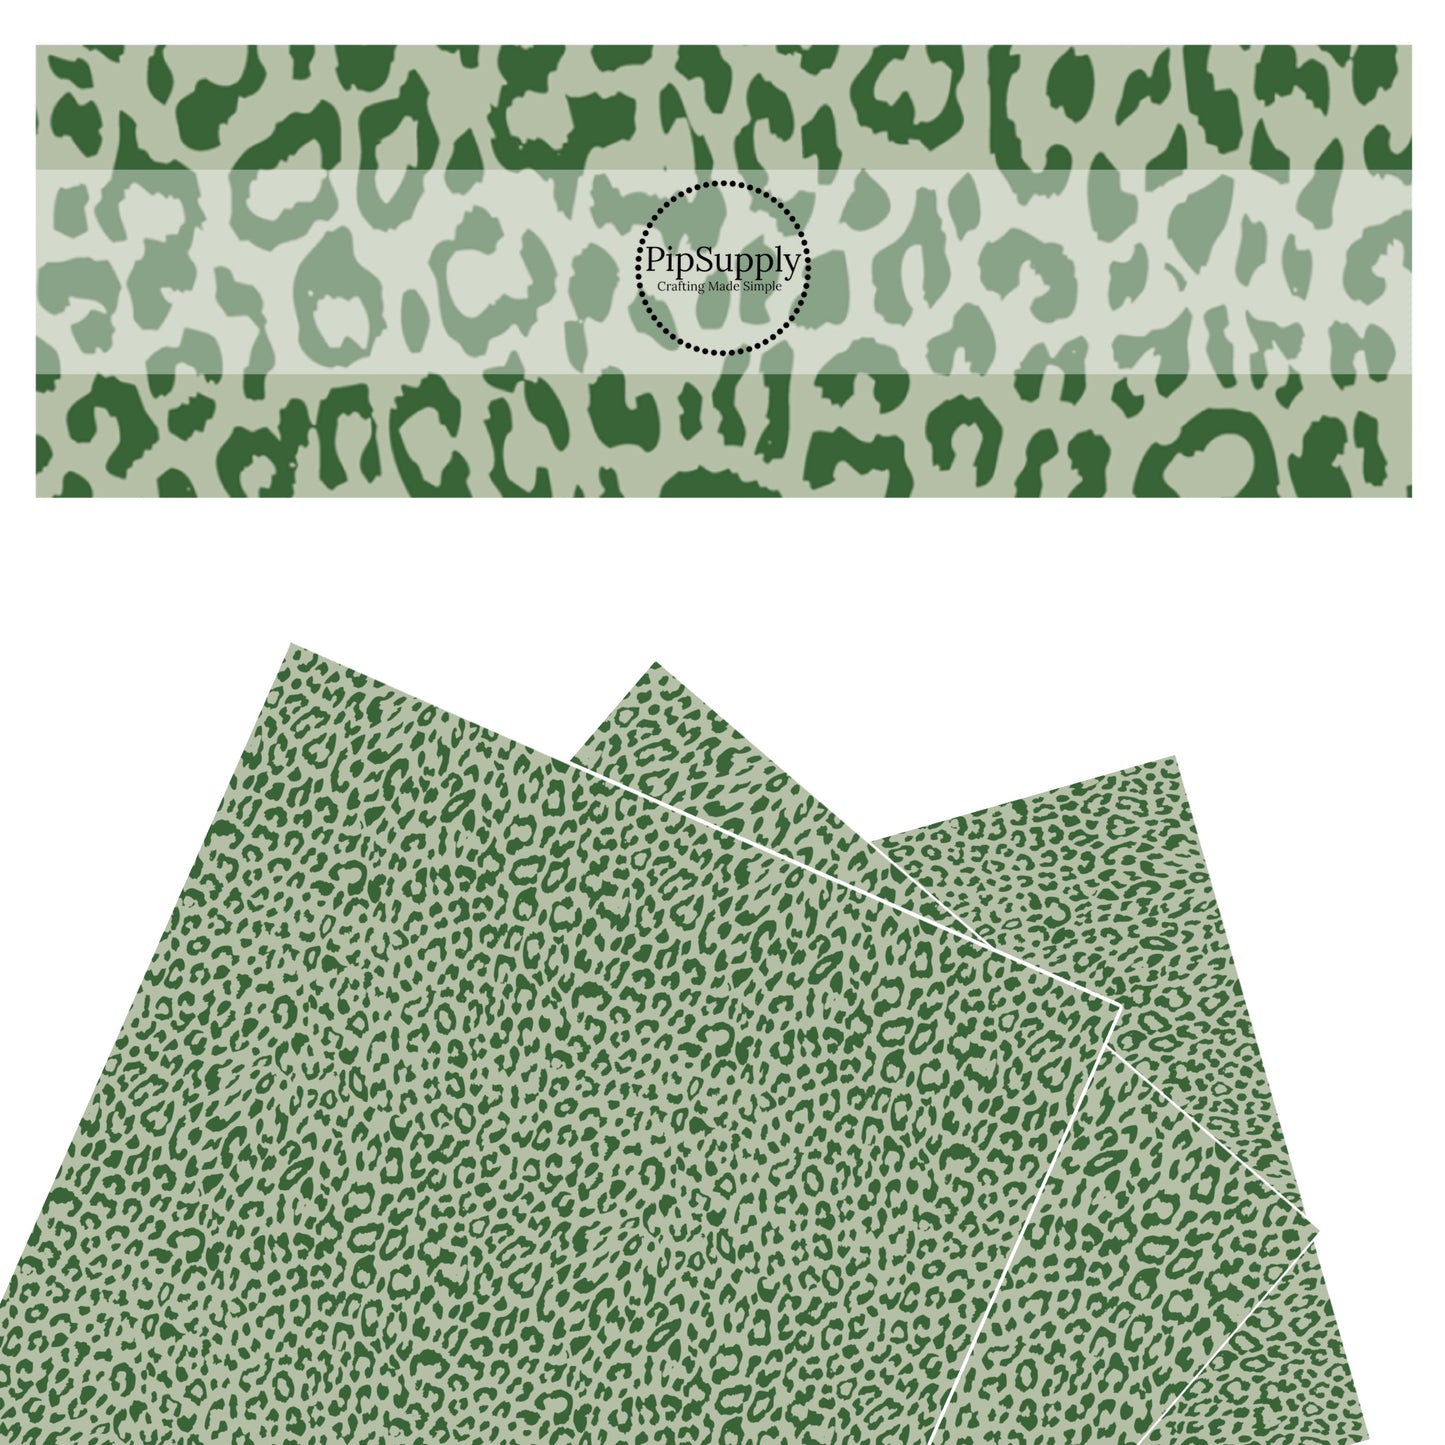 These classic leopard pattern themed faux leather sheets contain the following design elements: green colored leopard print. Our CPSIA compliant faux leather sheets or rolls can be used for all types of crafting projects.